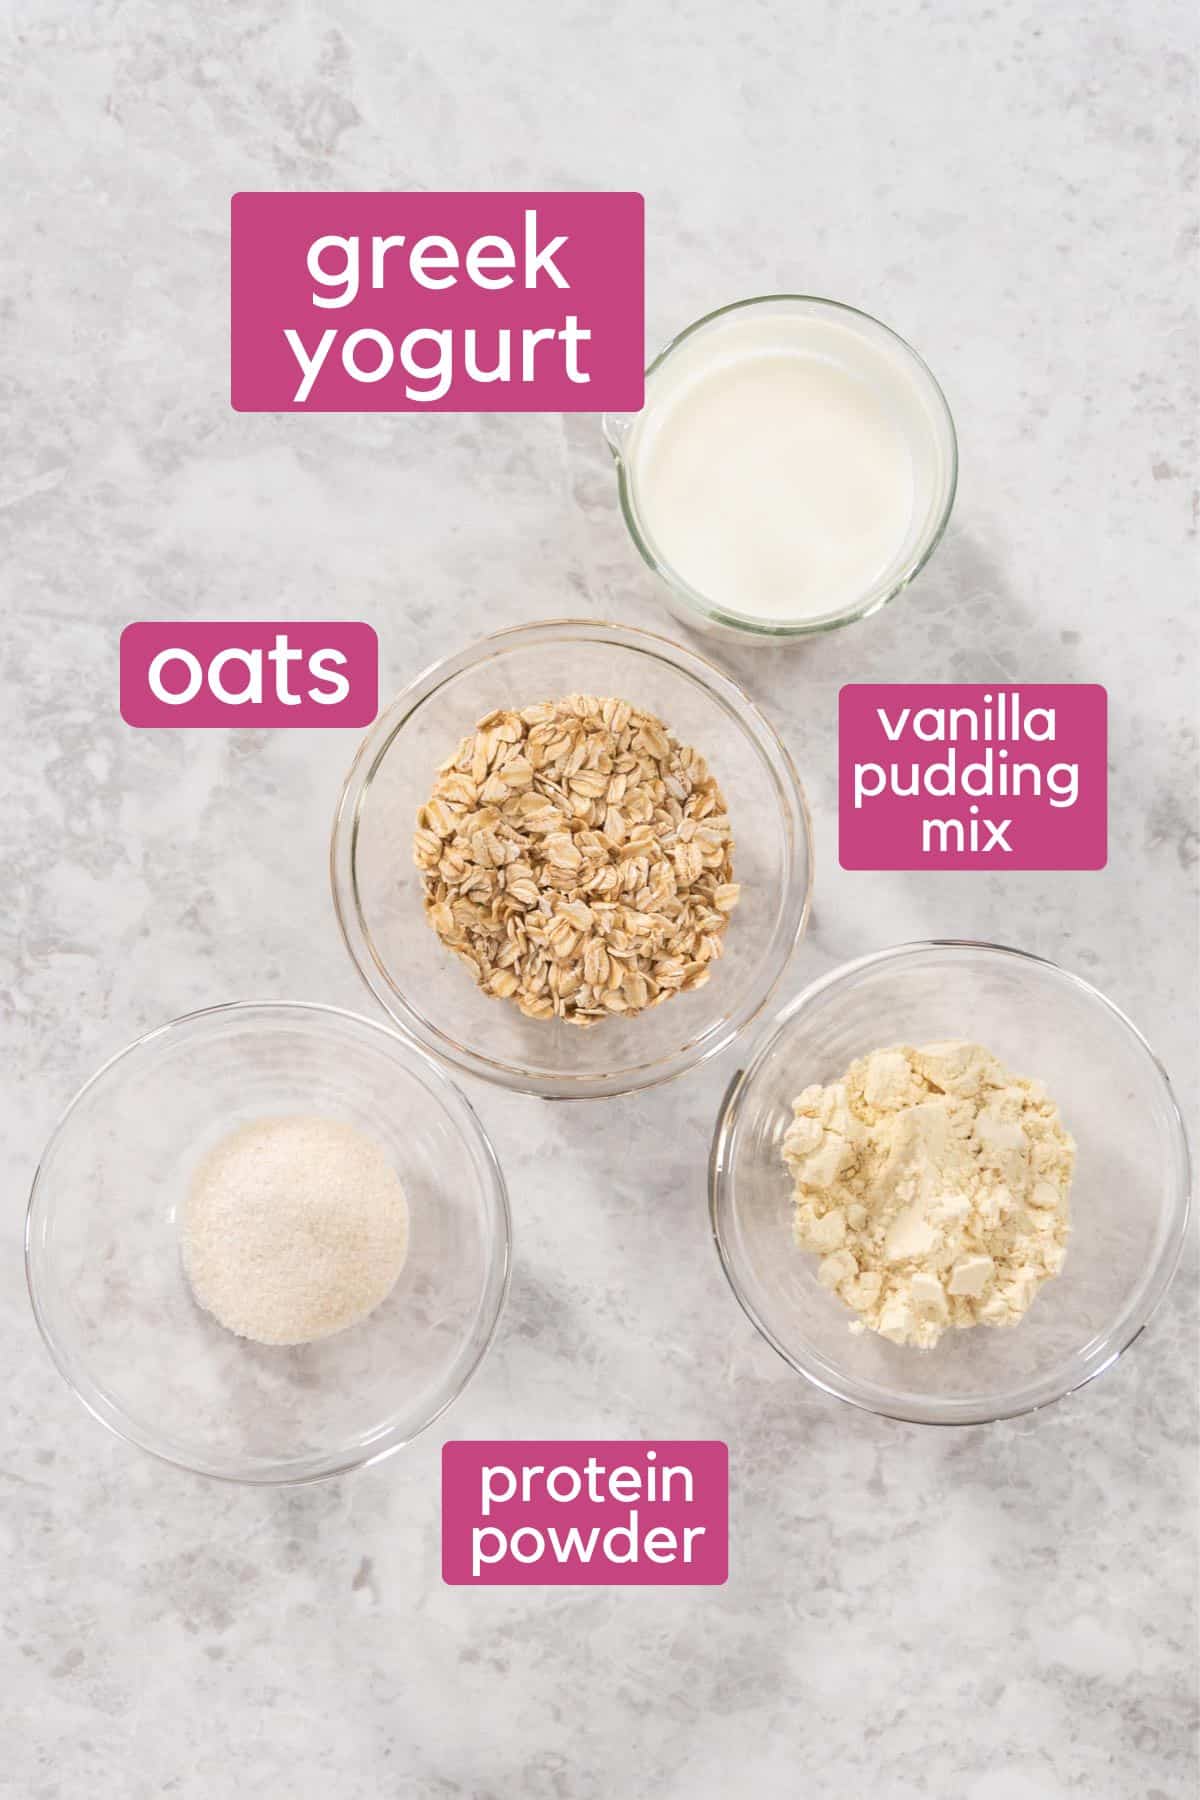 ingredients for PROATS (protein overnight oats)